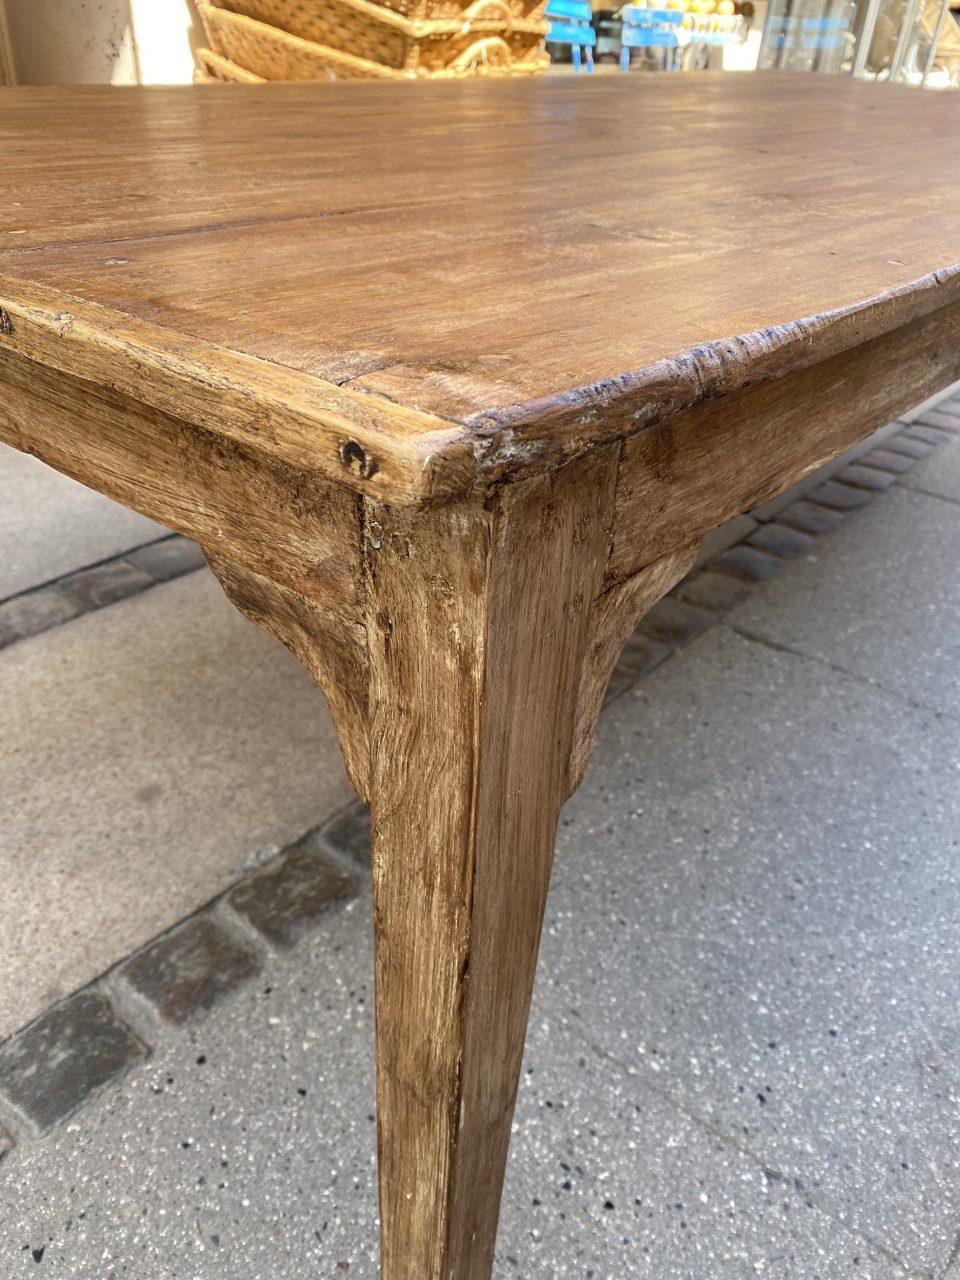 Delightfully large and solid vintage French long table with rustic charm and a lovely warm caramel colored patina. Originally from a restaurant / bistro in the south of France, where countless dinner meals have been served over the years.

An